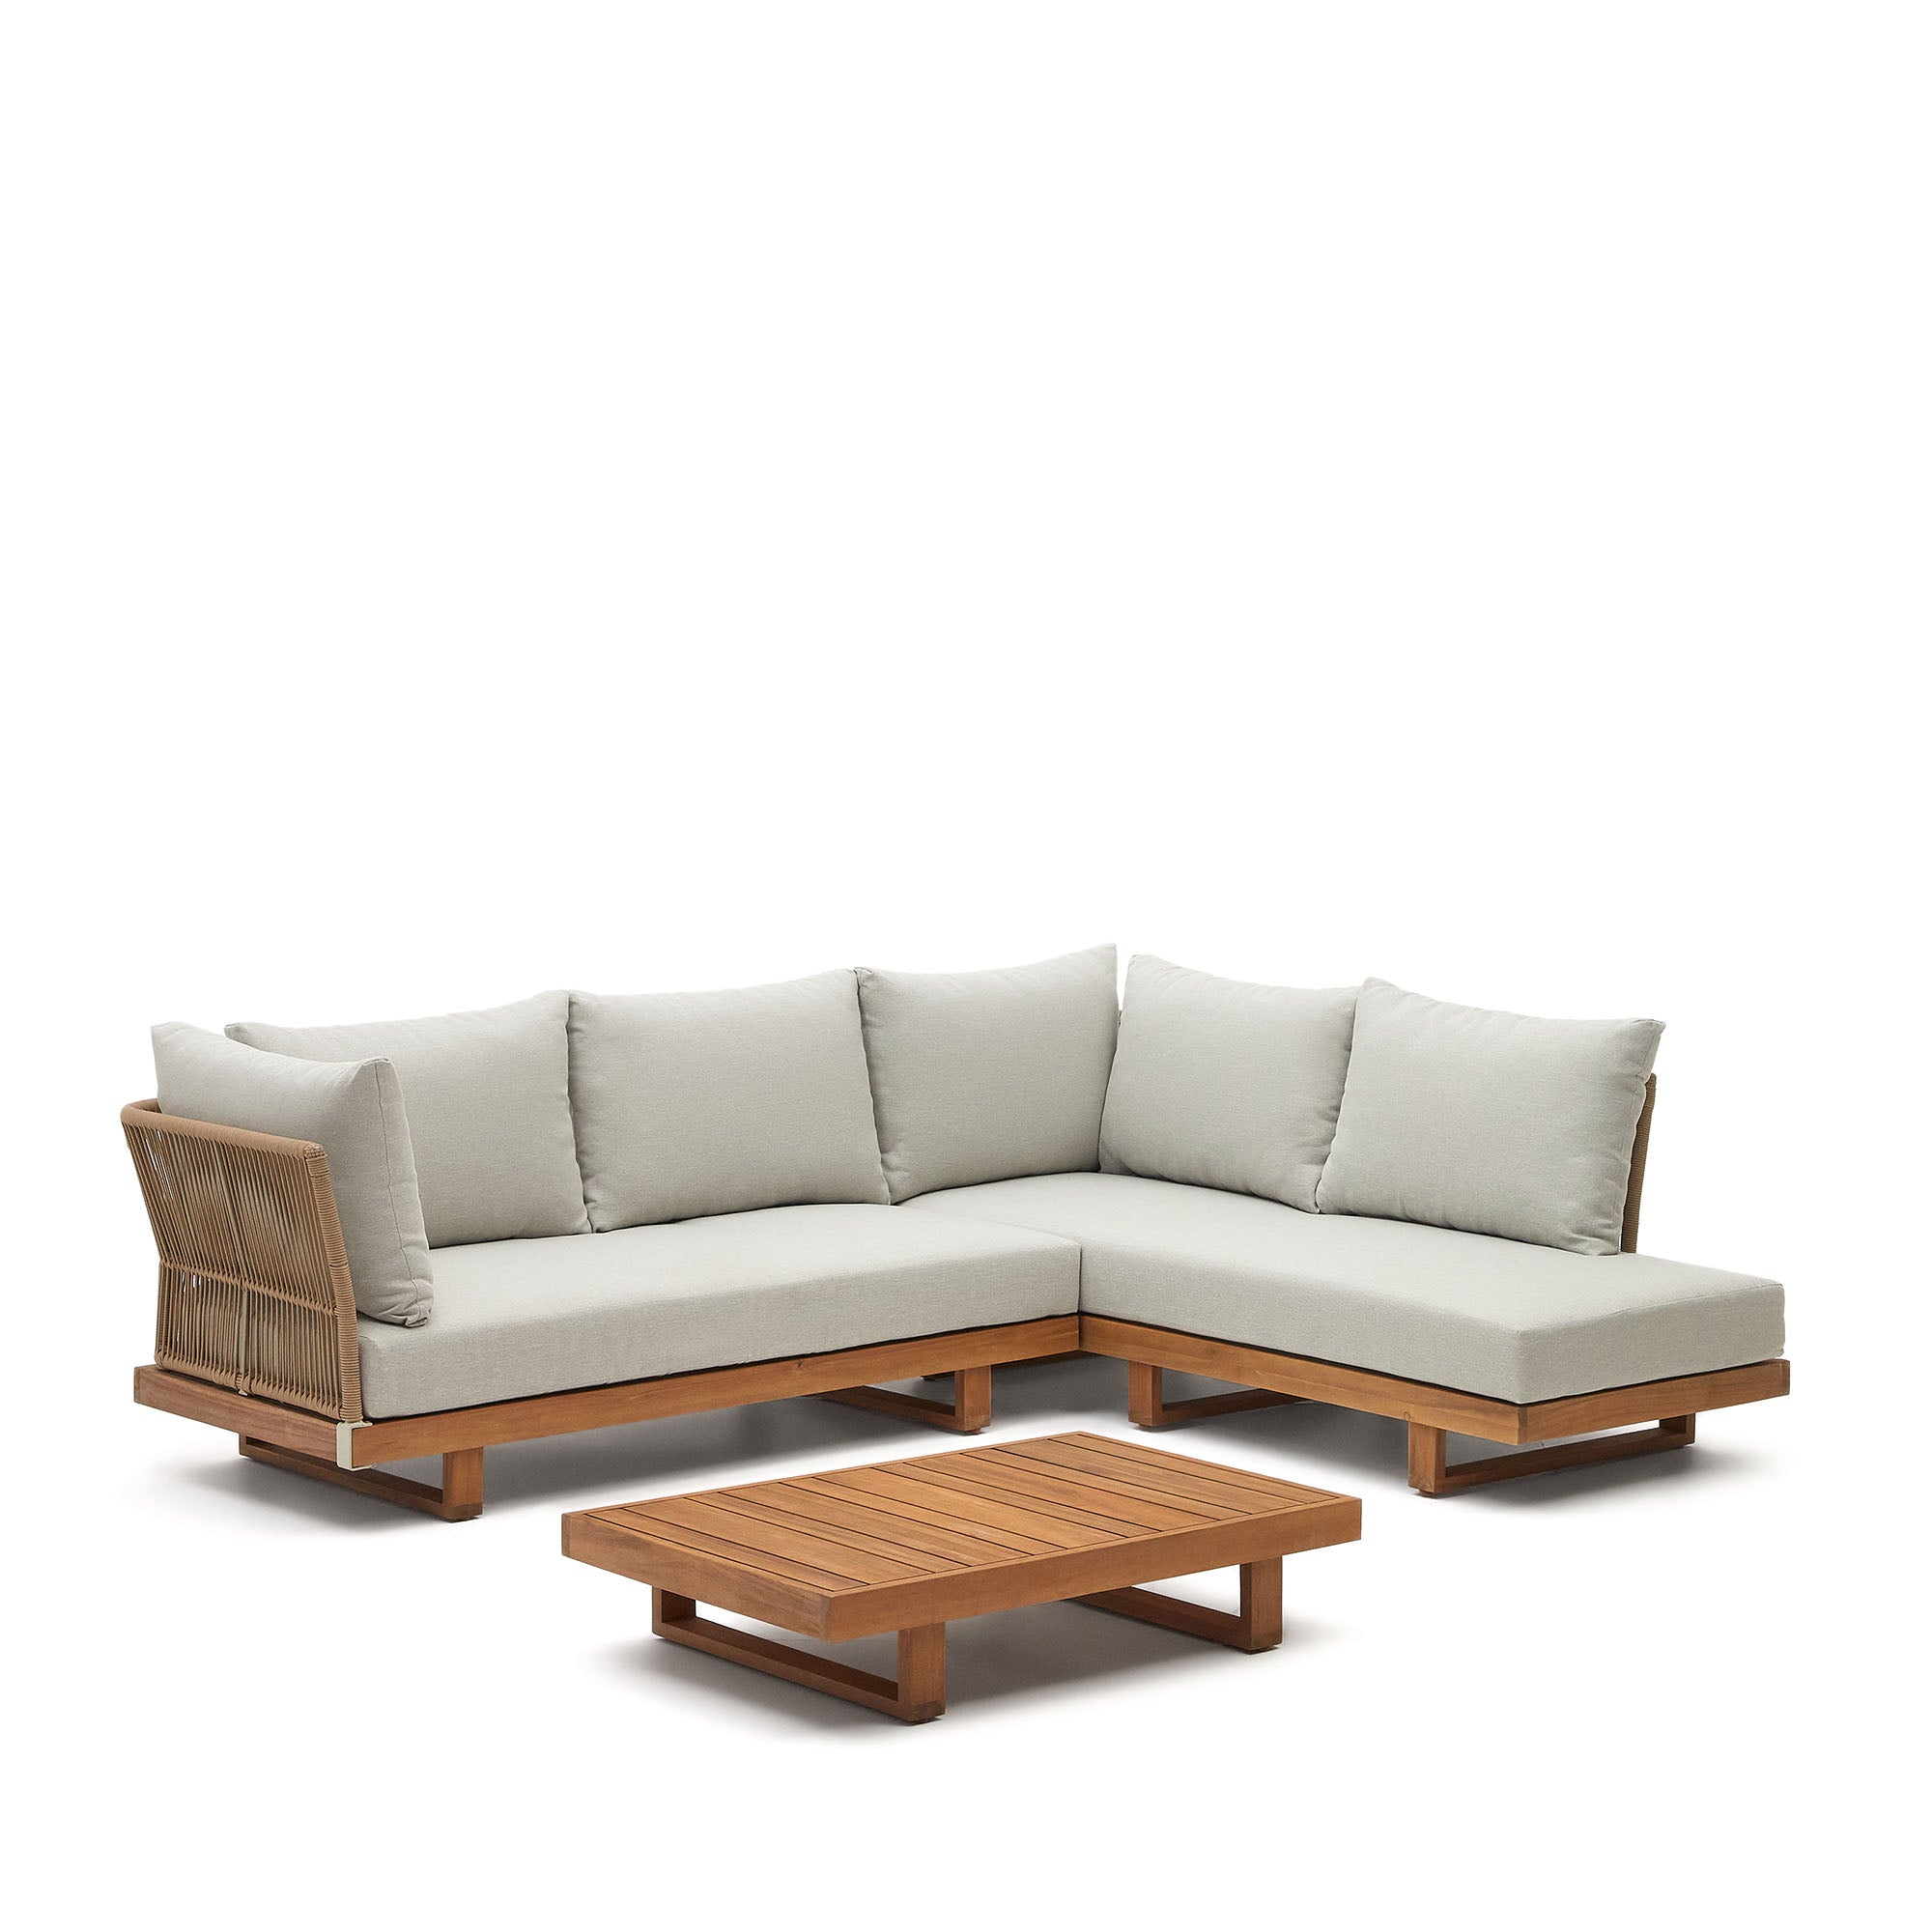 Raco 5 seater corner sofa and coffee table, made from solid acacia wood